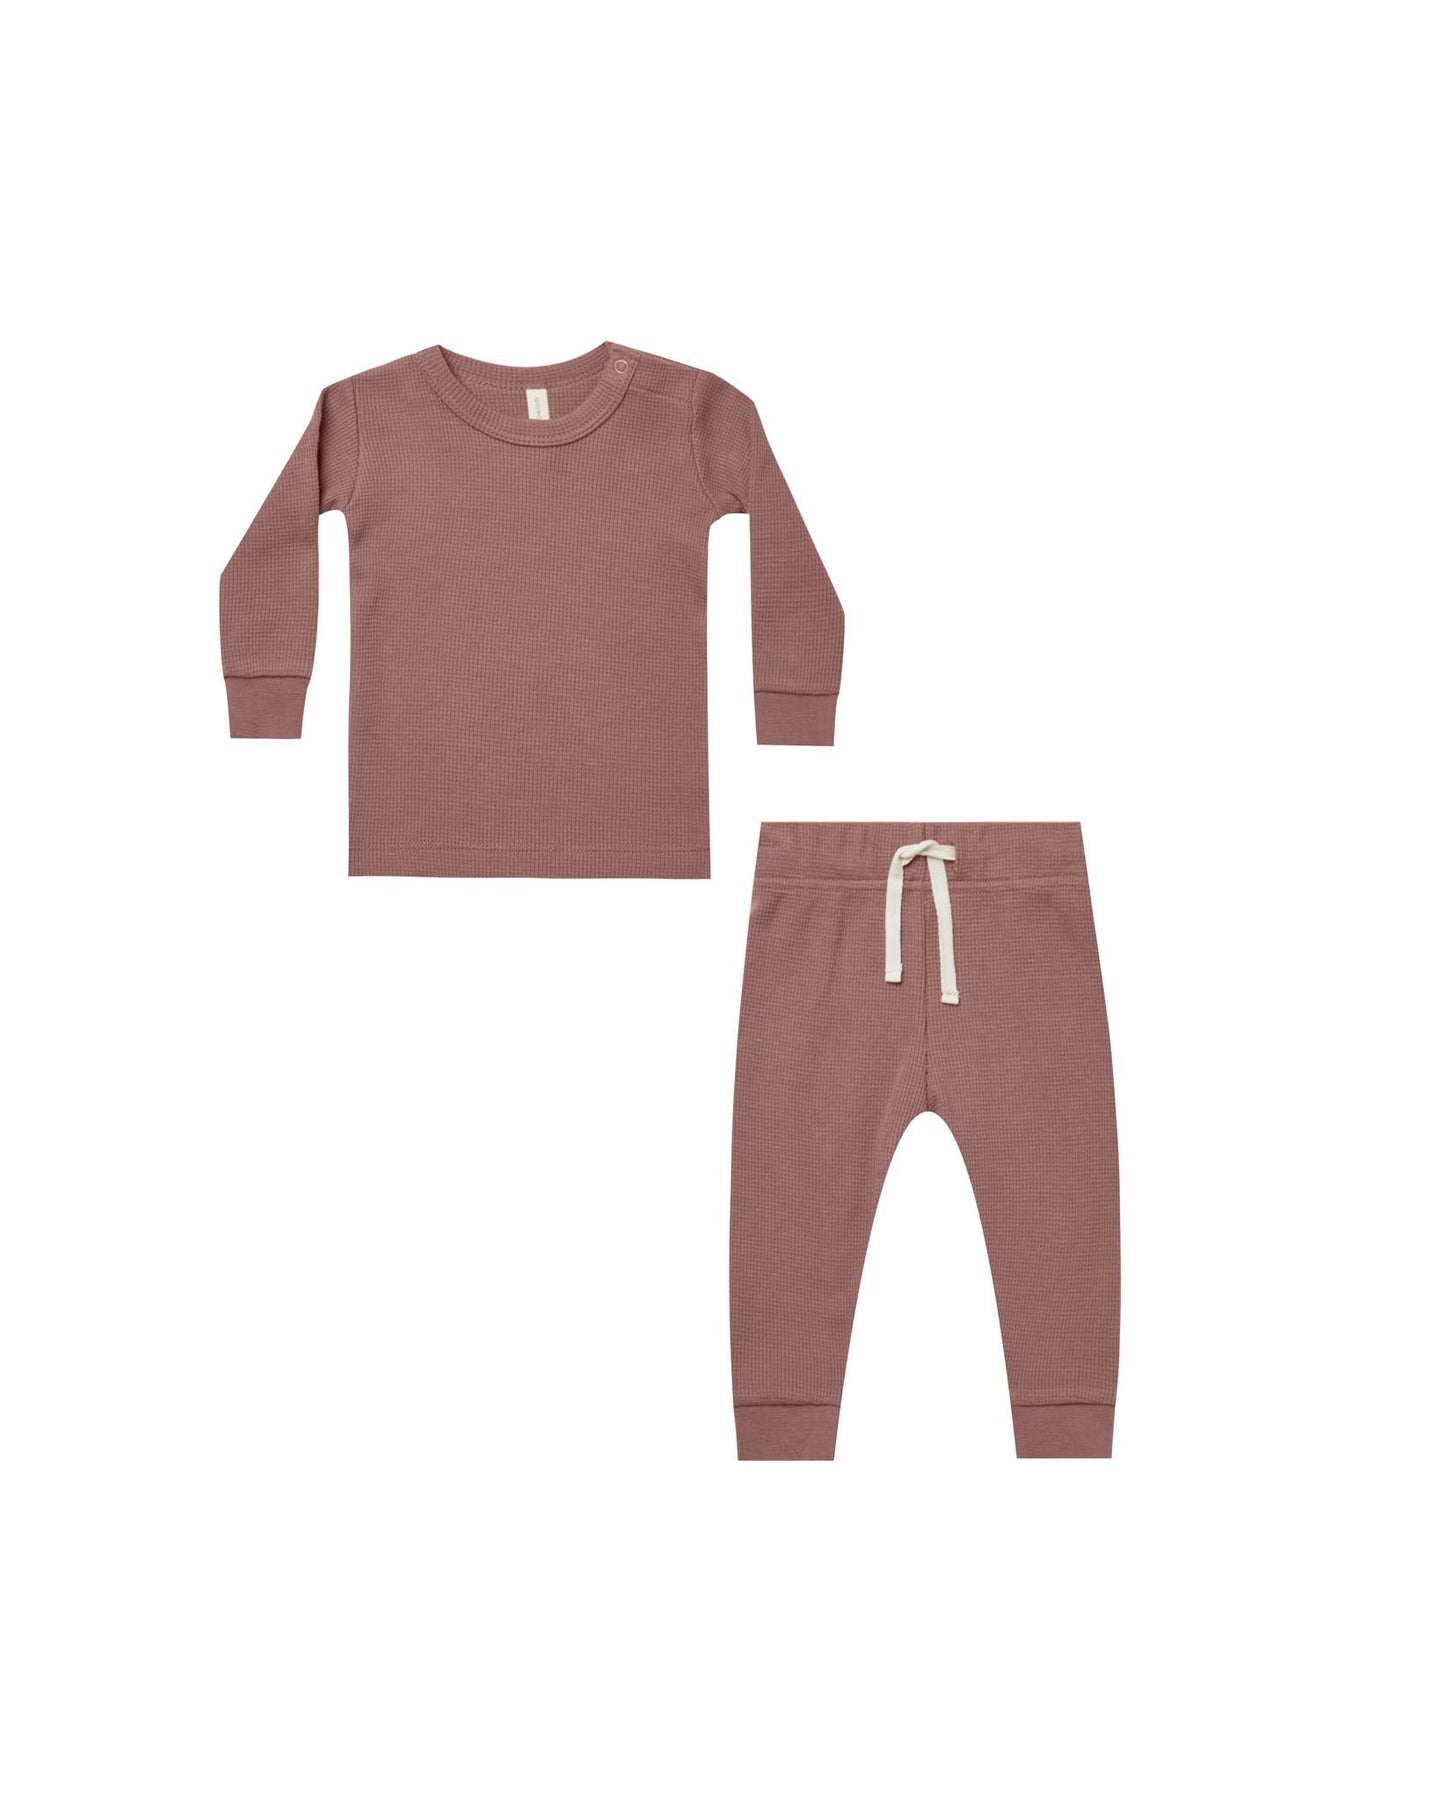 Quincy Mae - Waffle Top + Pant Set - Fig